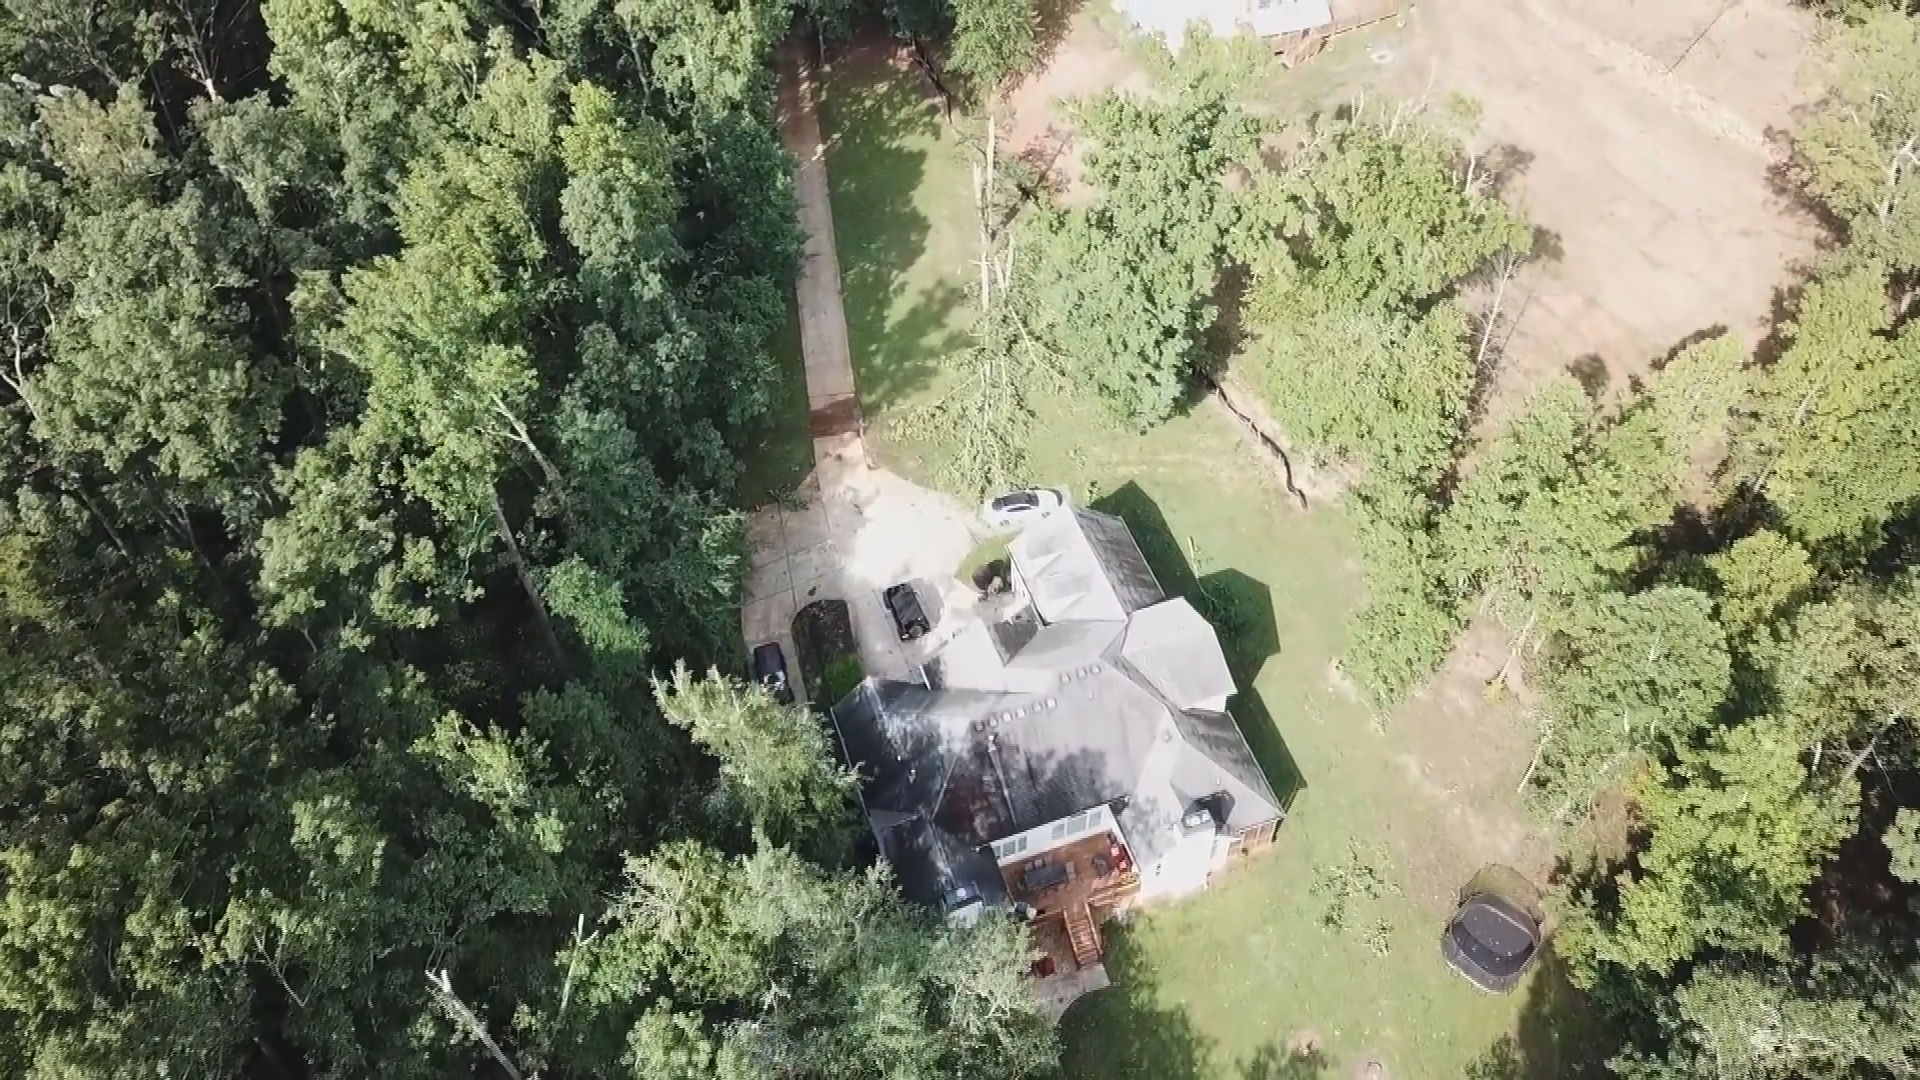 The National Weather Service is examining drone video of an area of Forsyth County to determine if a tornado or a downburst caused damage to homes and trees in that part of the metro area early Saturday morning.